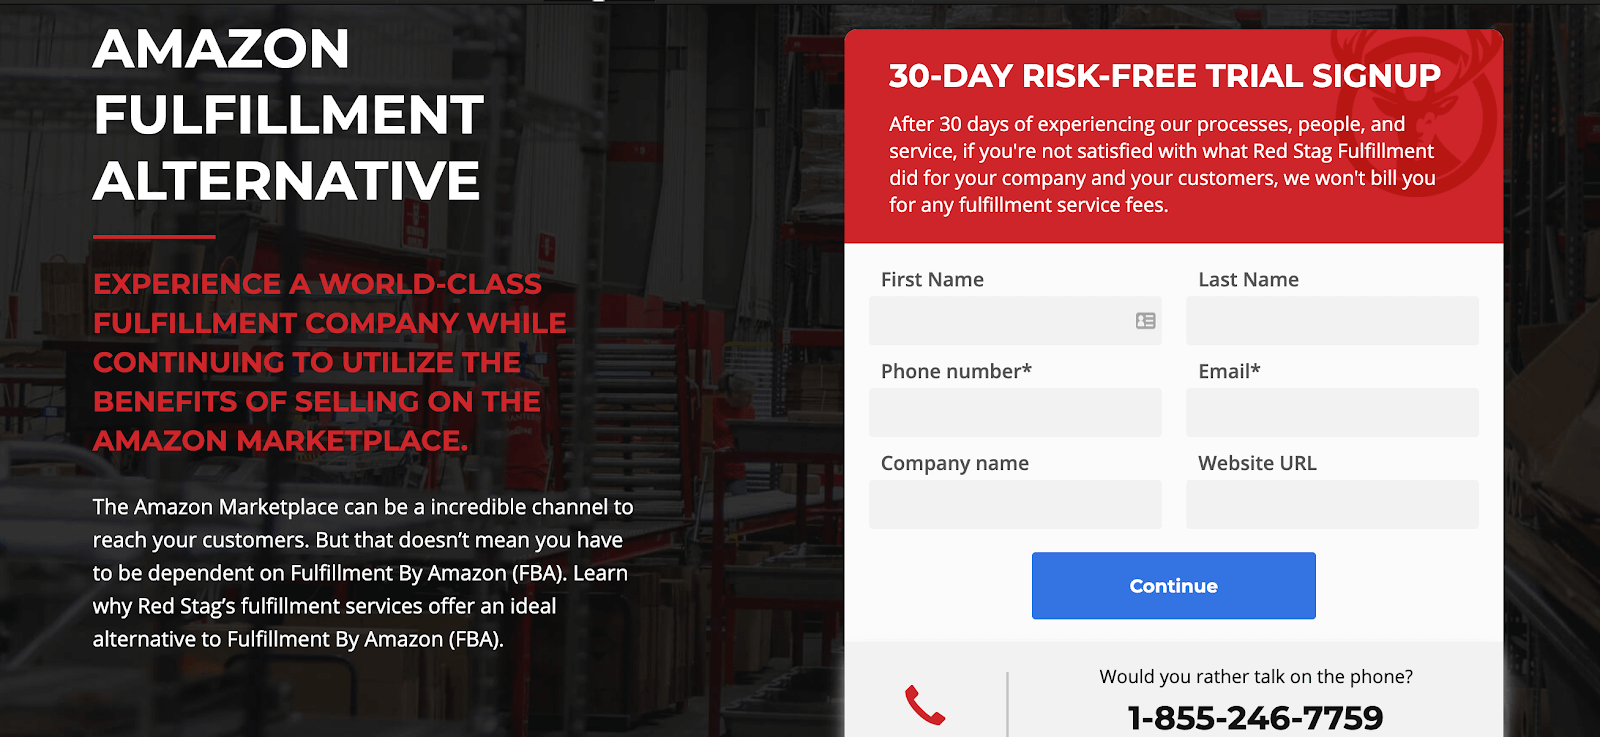 Amazon's fulfillment alternatives: trial signup page